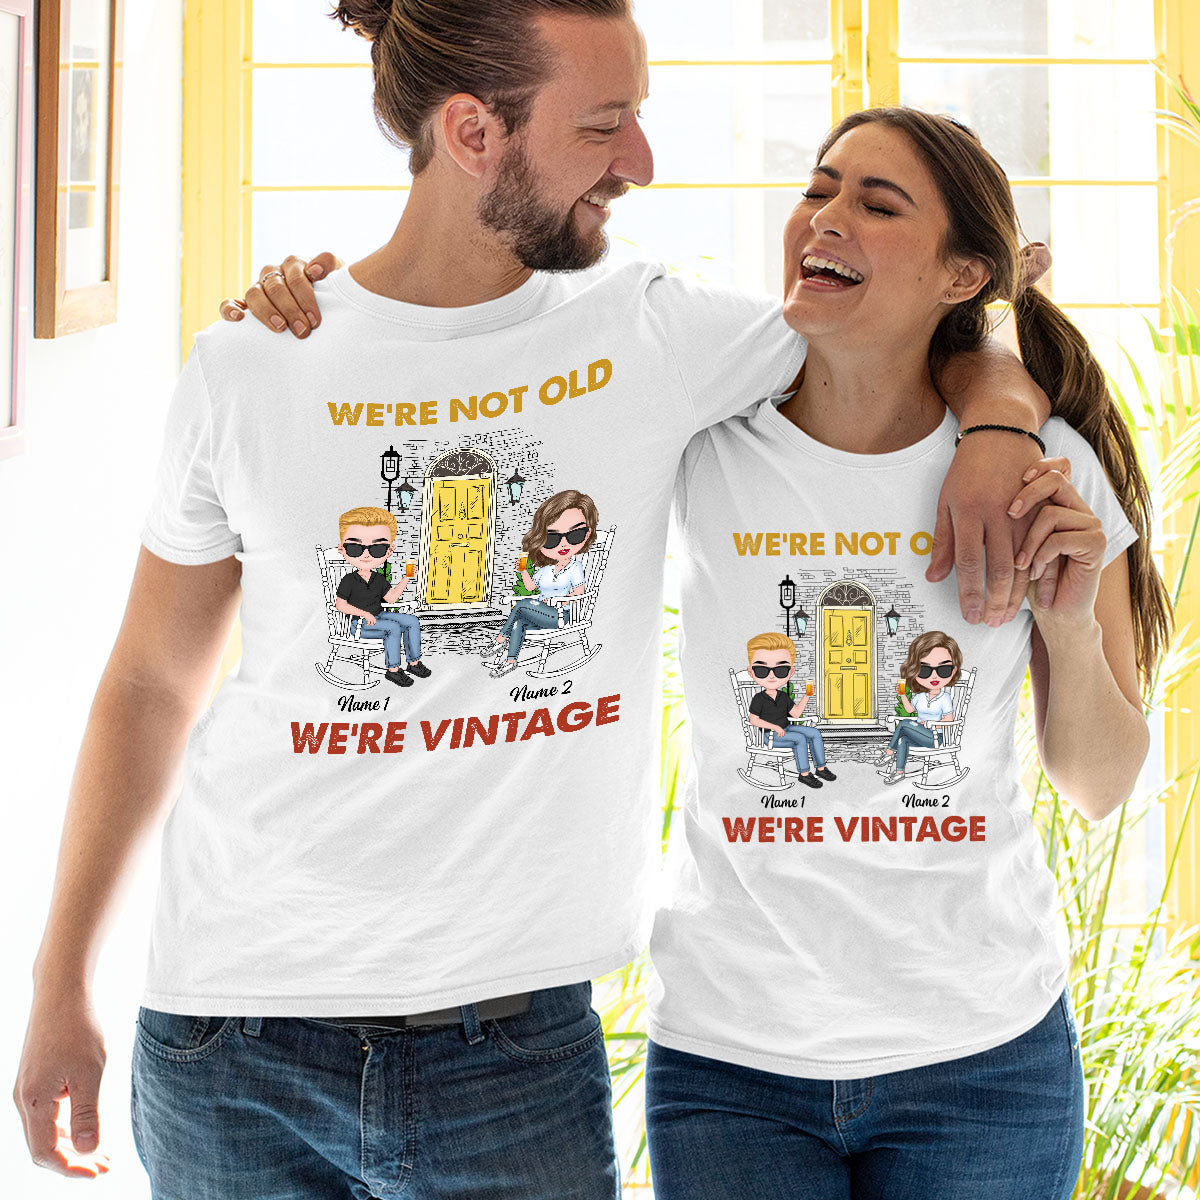 We're Not Old Personalized Custom Shirts for Men Woman Loving Gift For Couple, Boyfriend, Girlfriend, Husband, Wife Valentine day